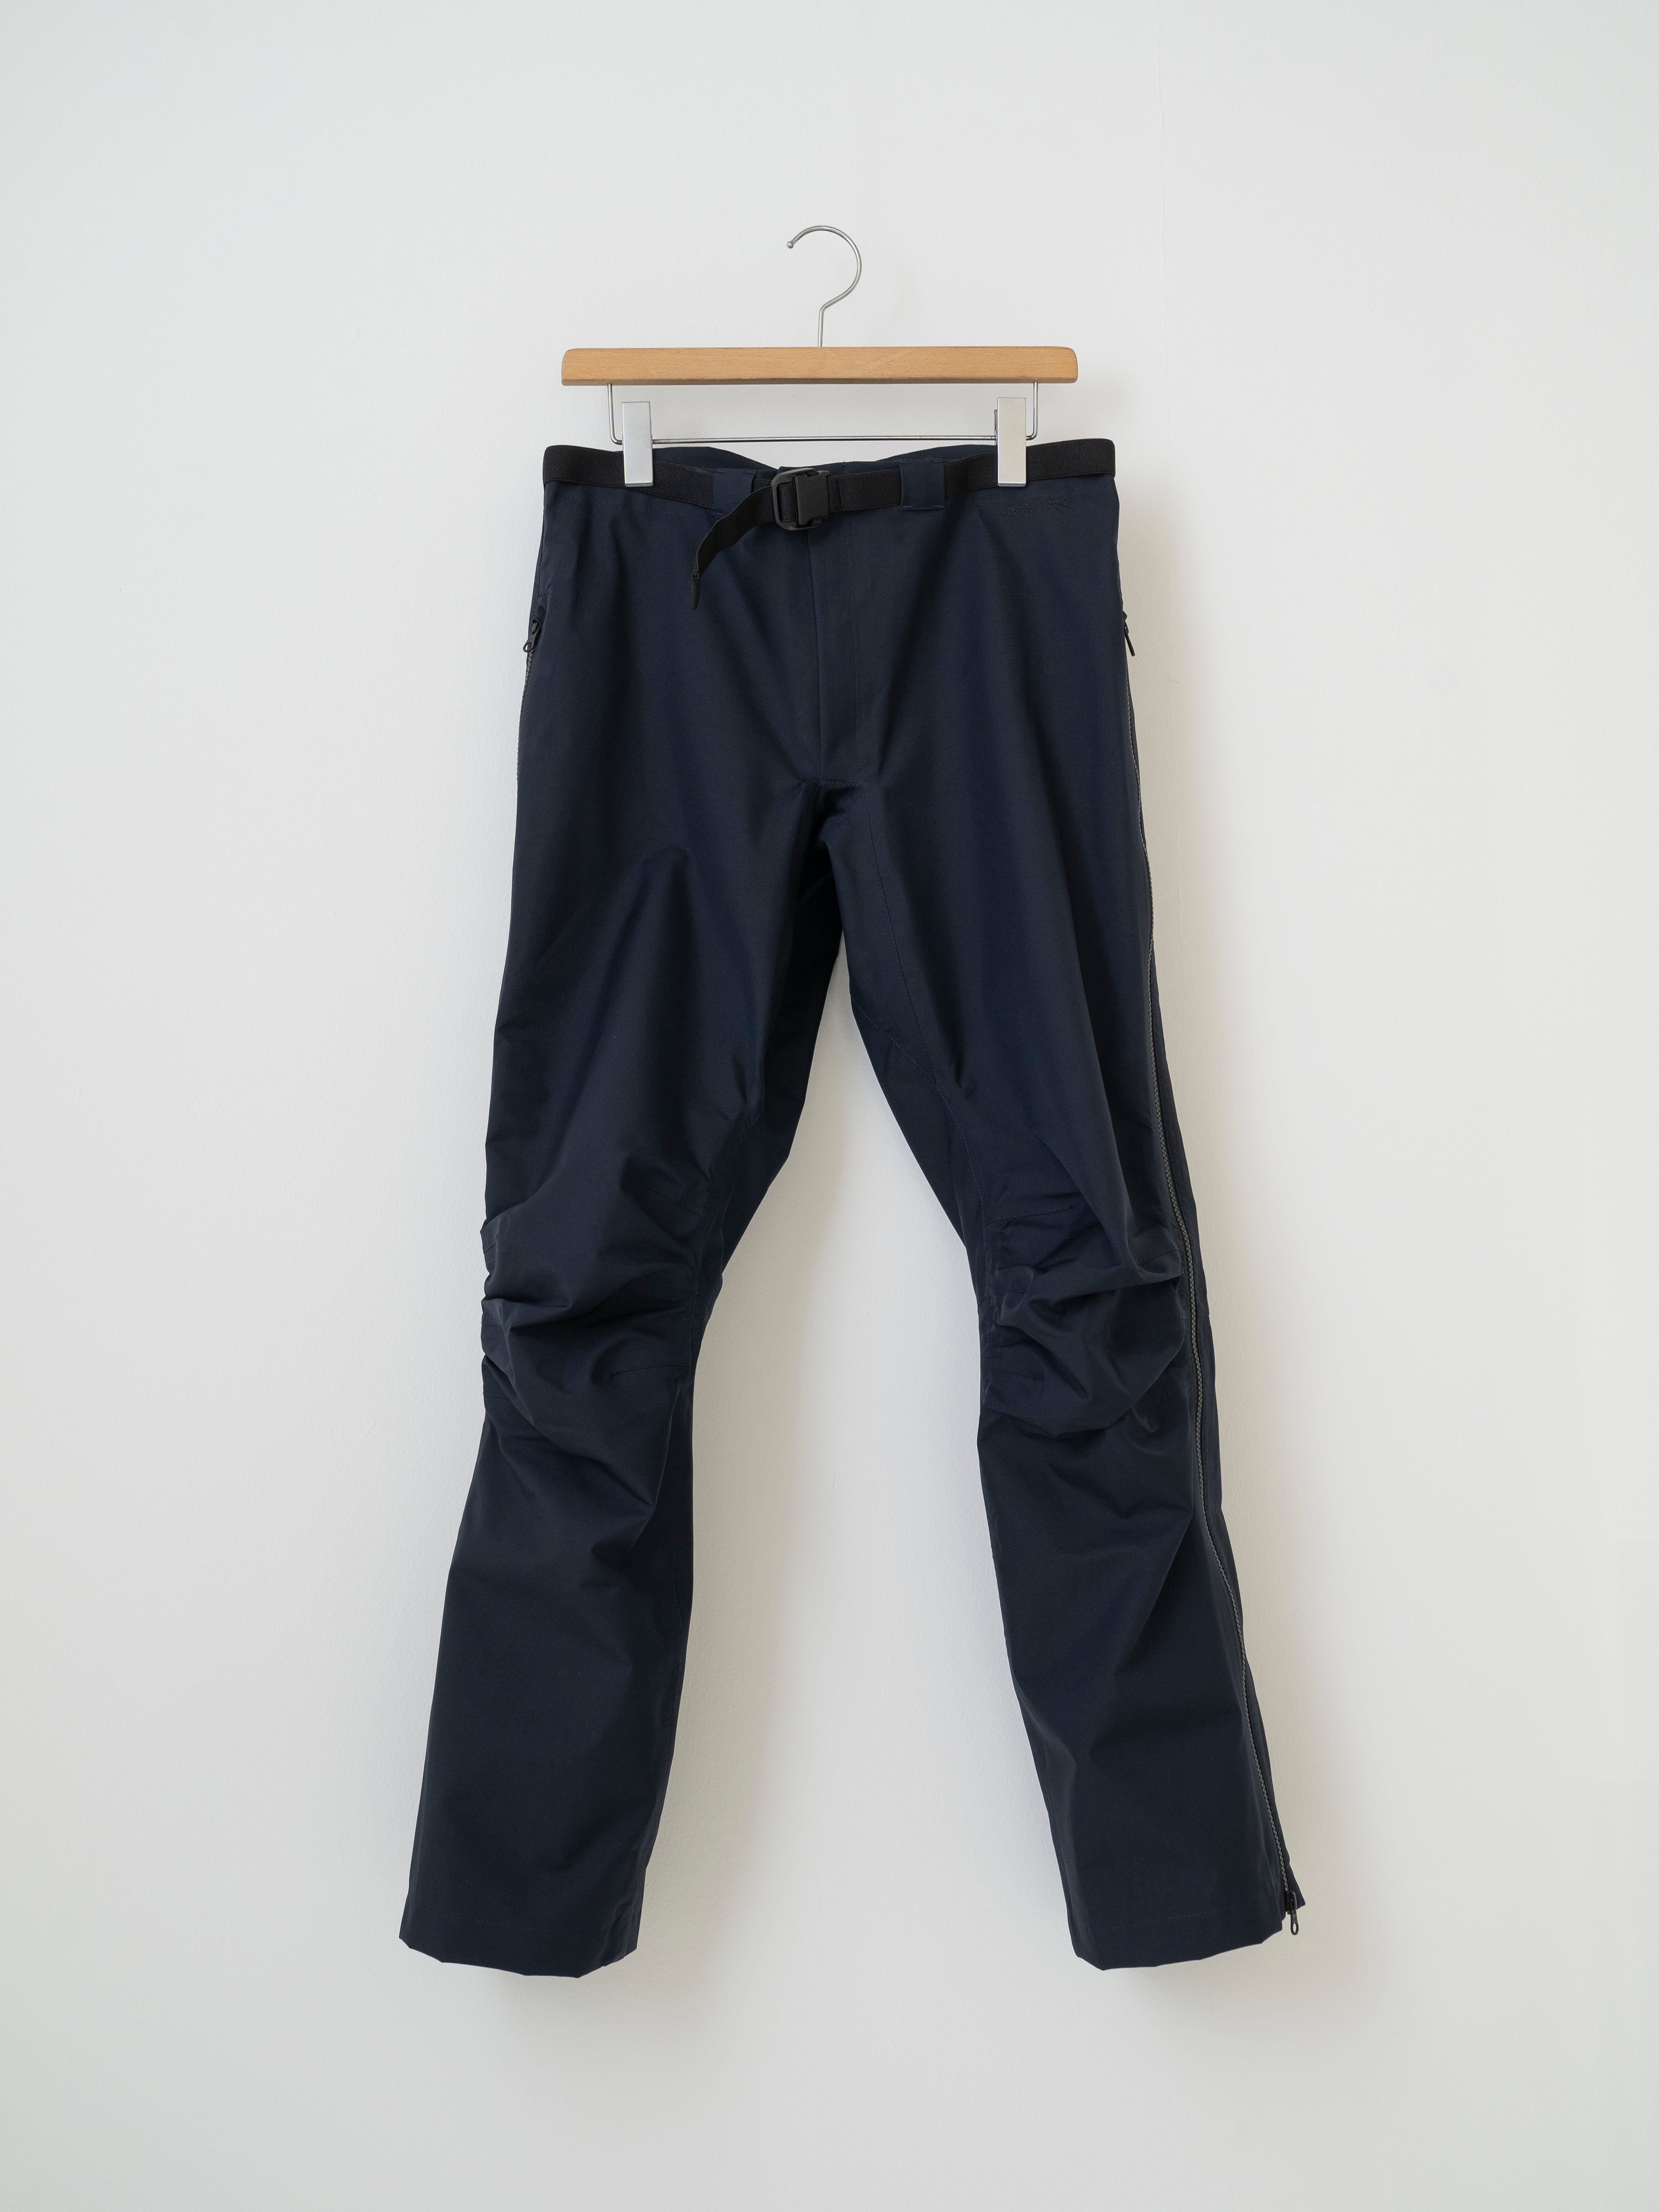 GR10K　WR BEMBECULA ARC PANTS　BLUE NAVY　AW23GR1AAGVNY | BEST PACKING STORE